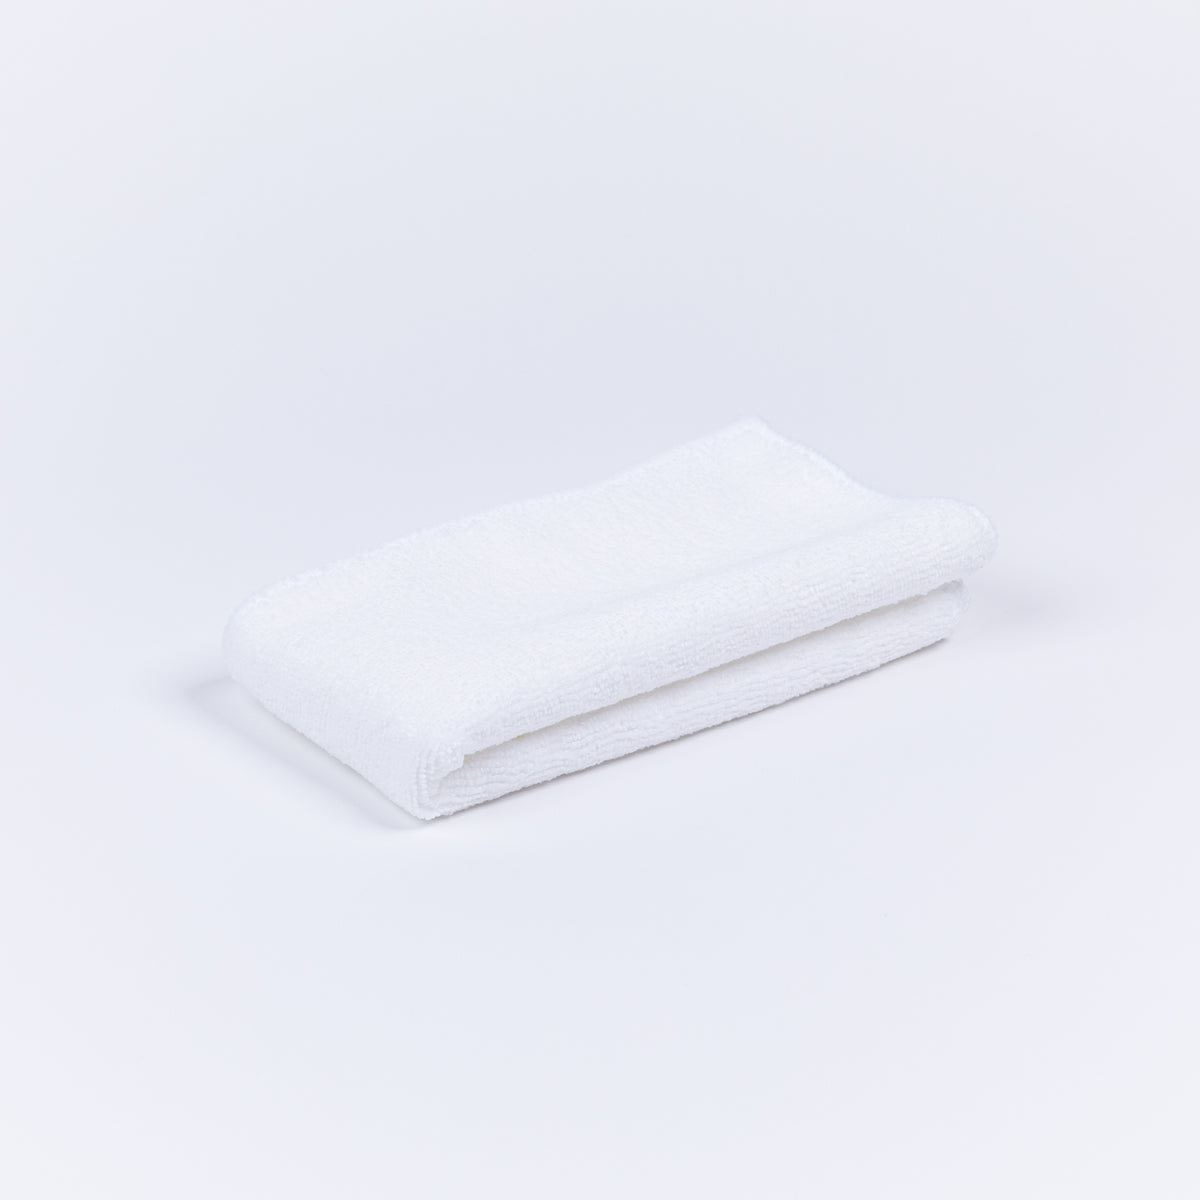 LAUNDRY - MICROFIBER Cleaning Cloths (6 Pack)